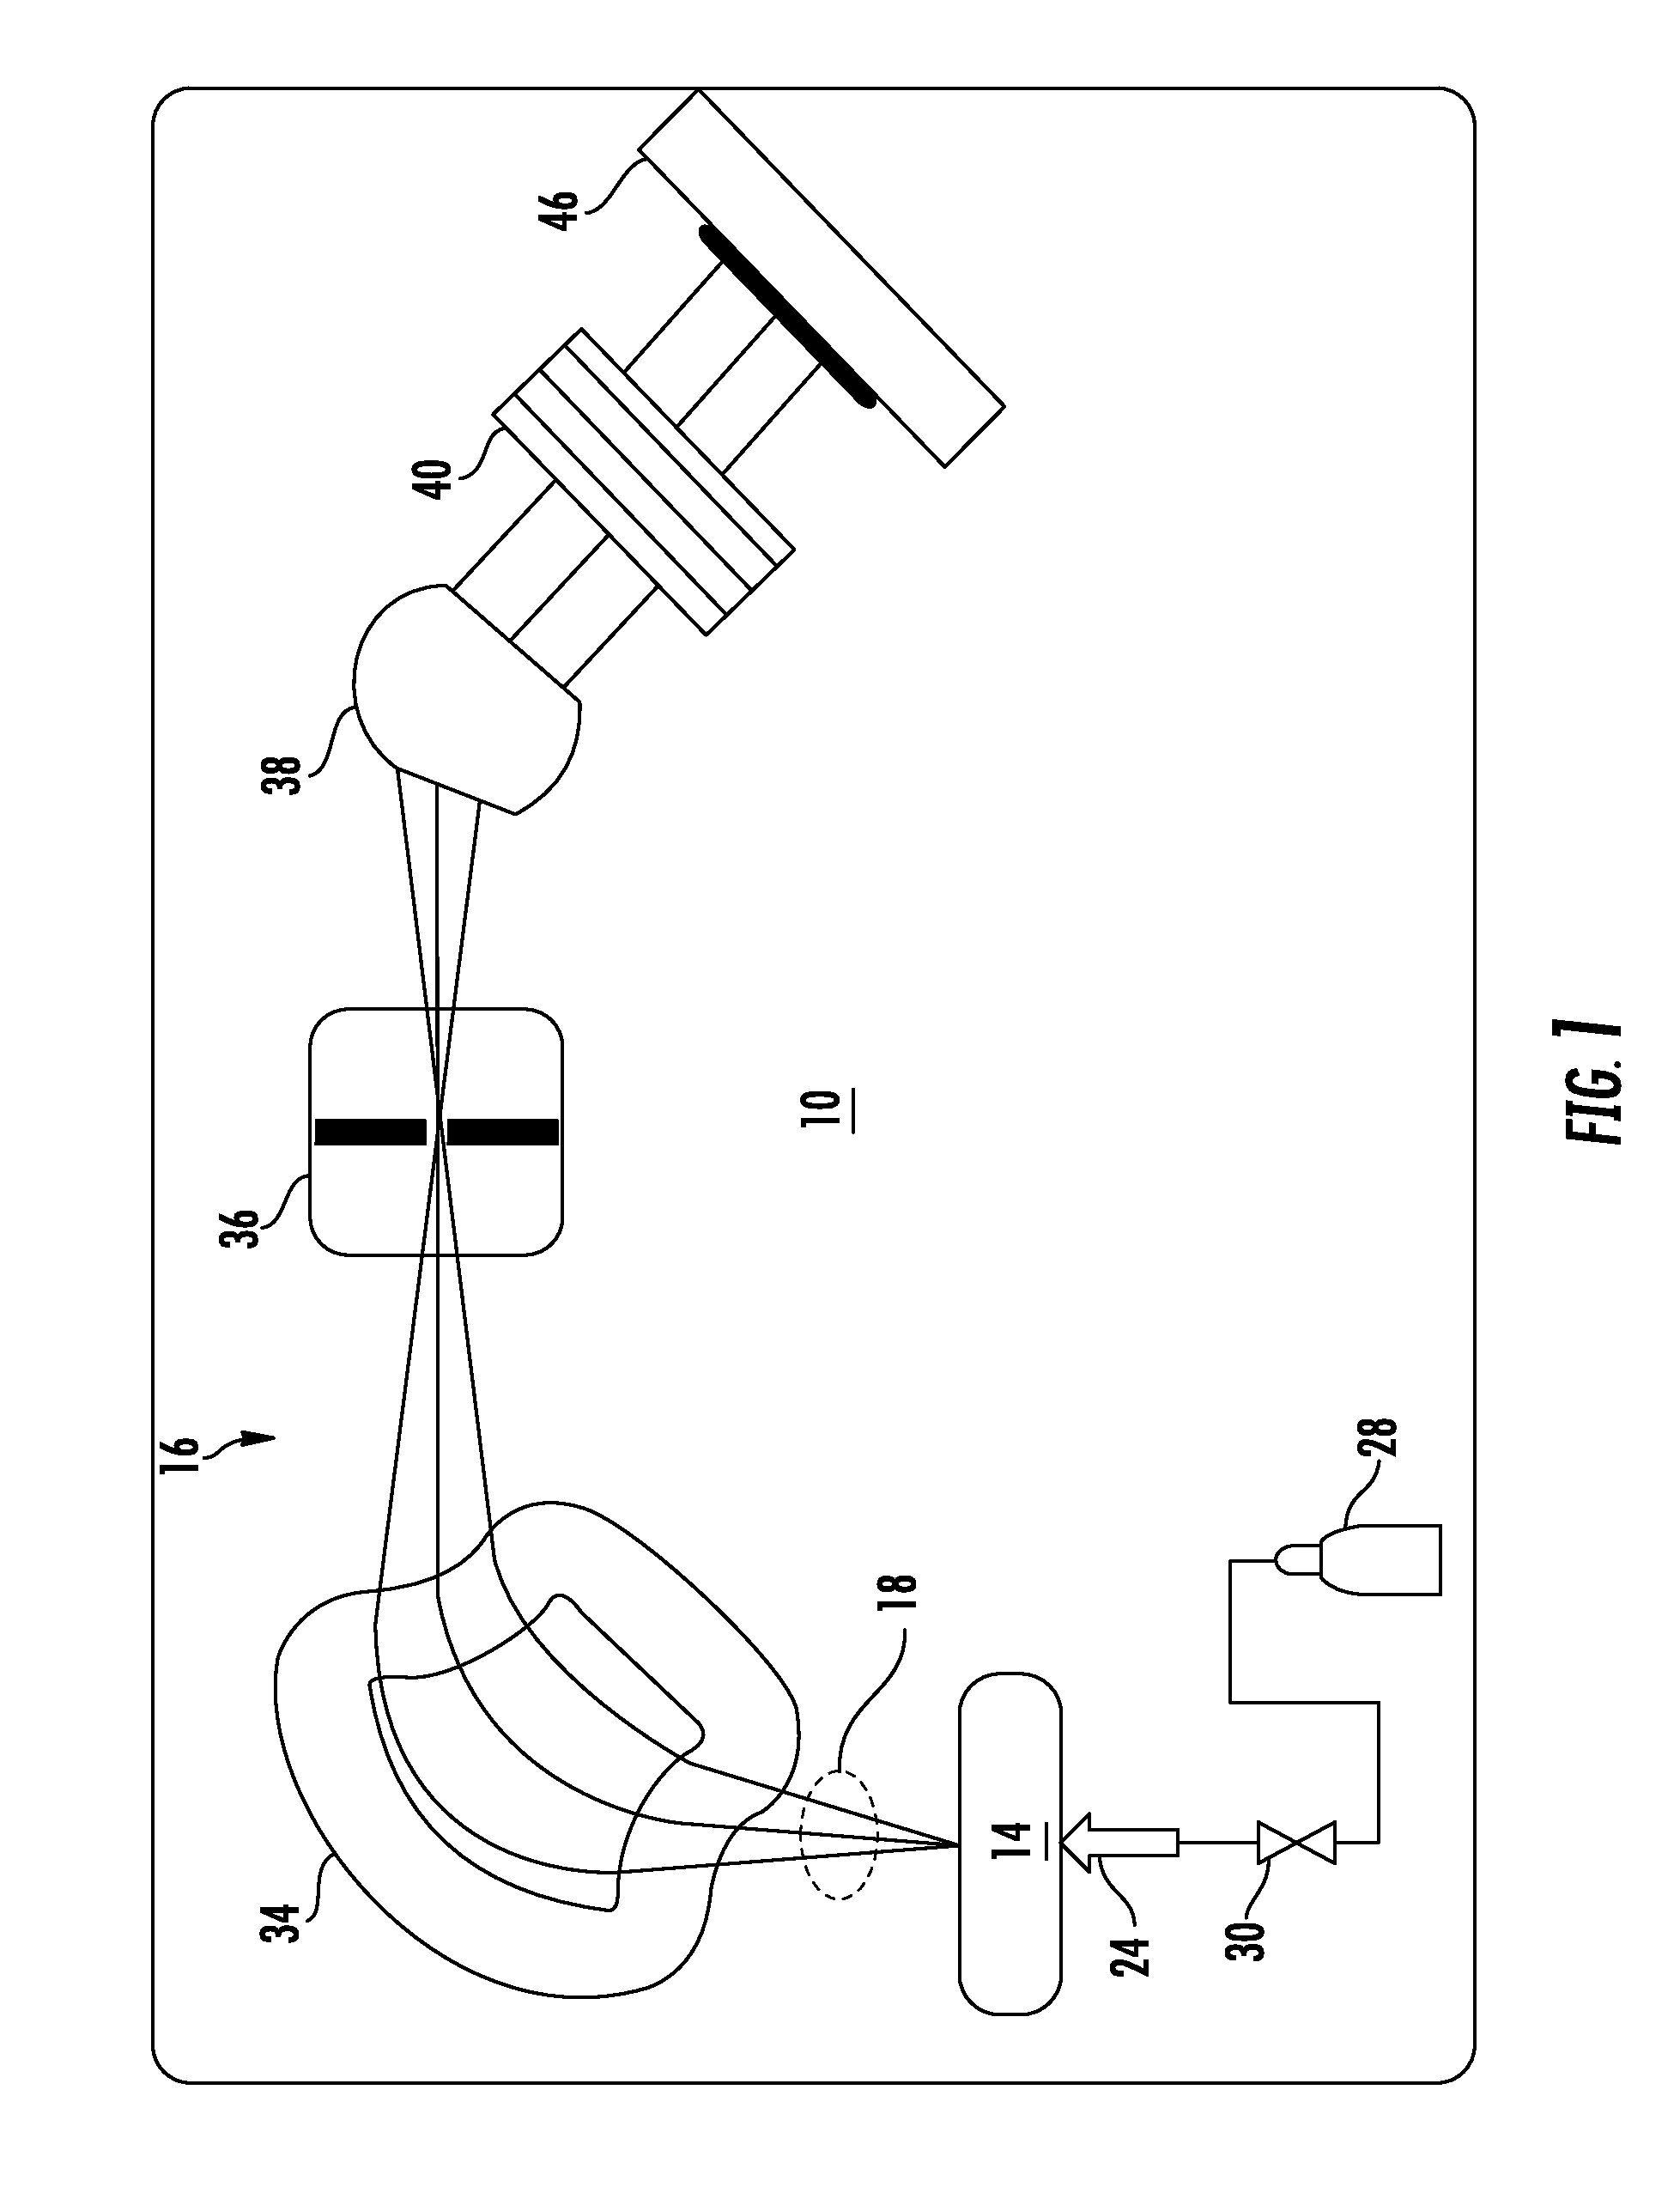 Controlling contamination particle trajectory from a beam-line electrostatic element